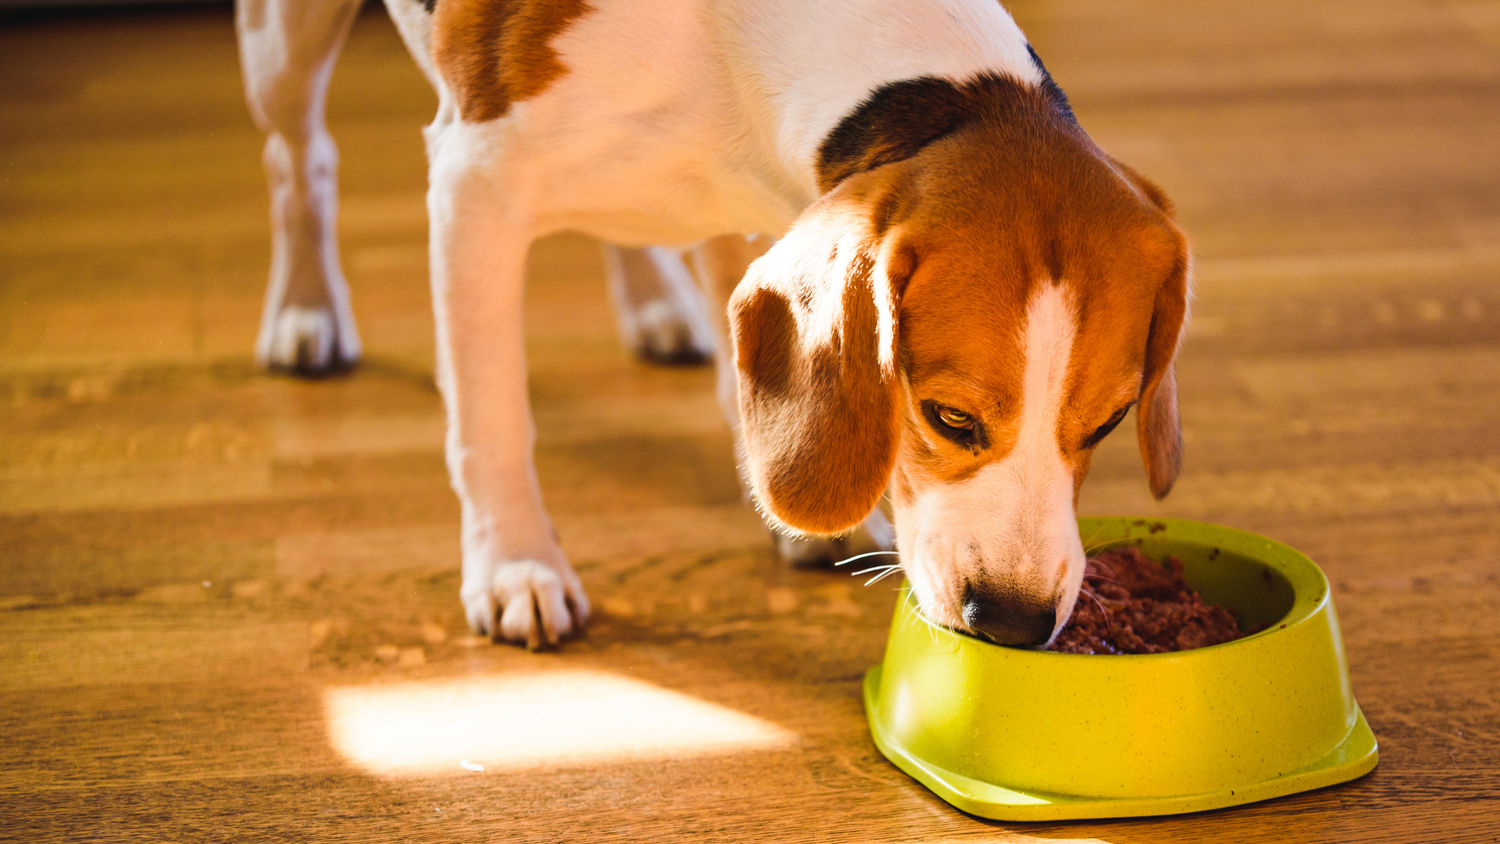 beagle eating dog food from a green bowl